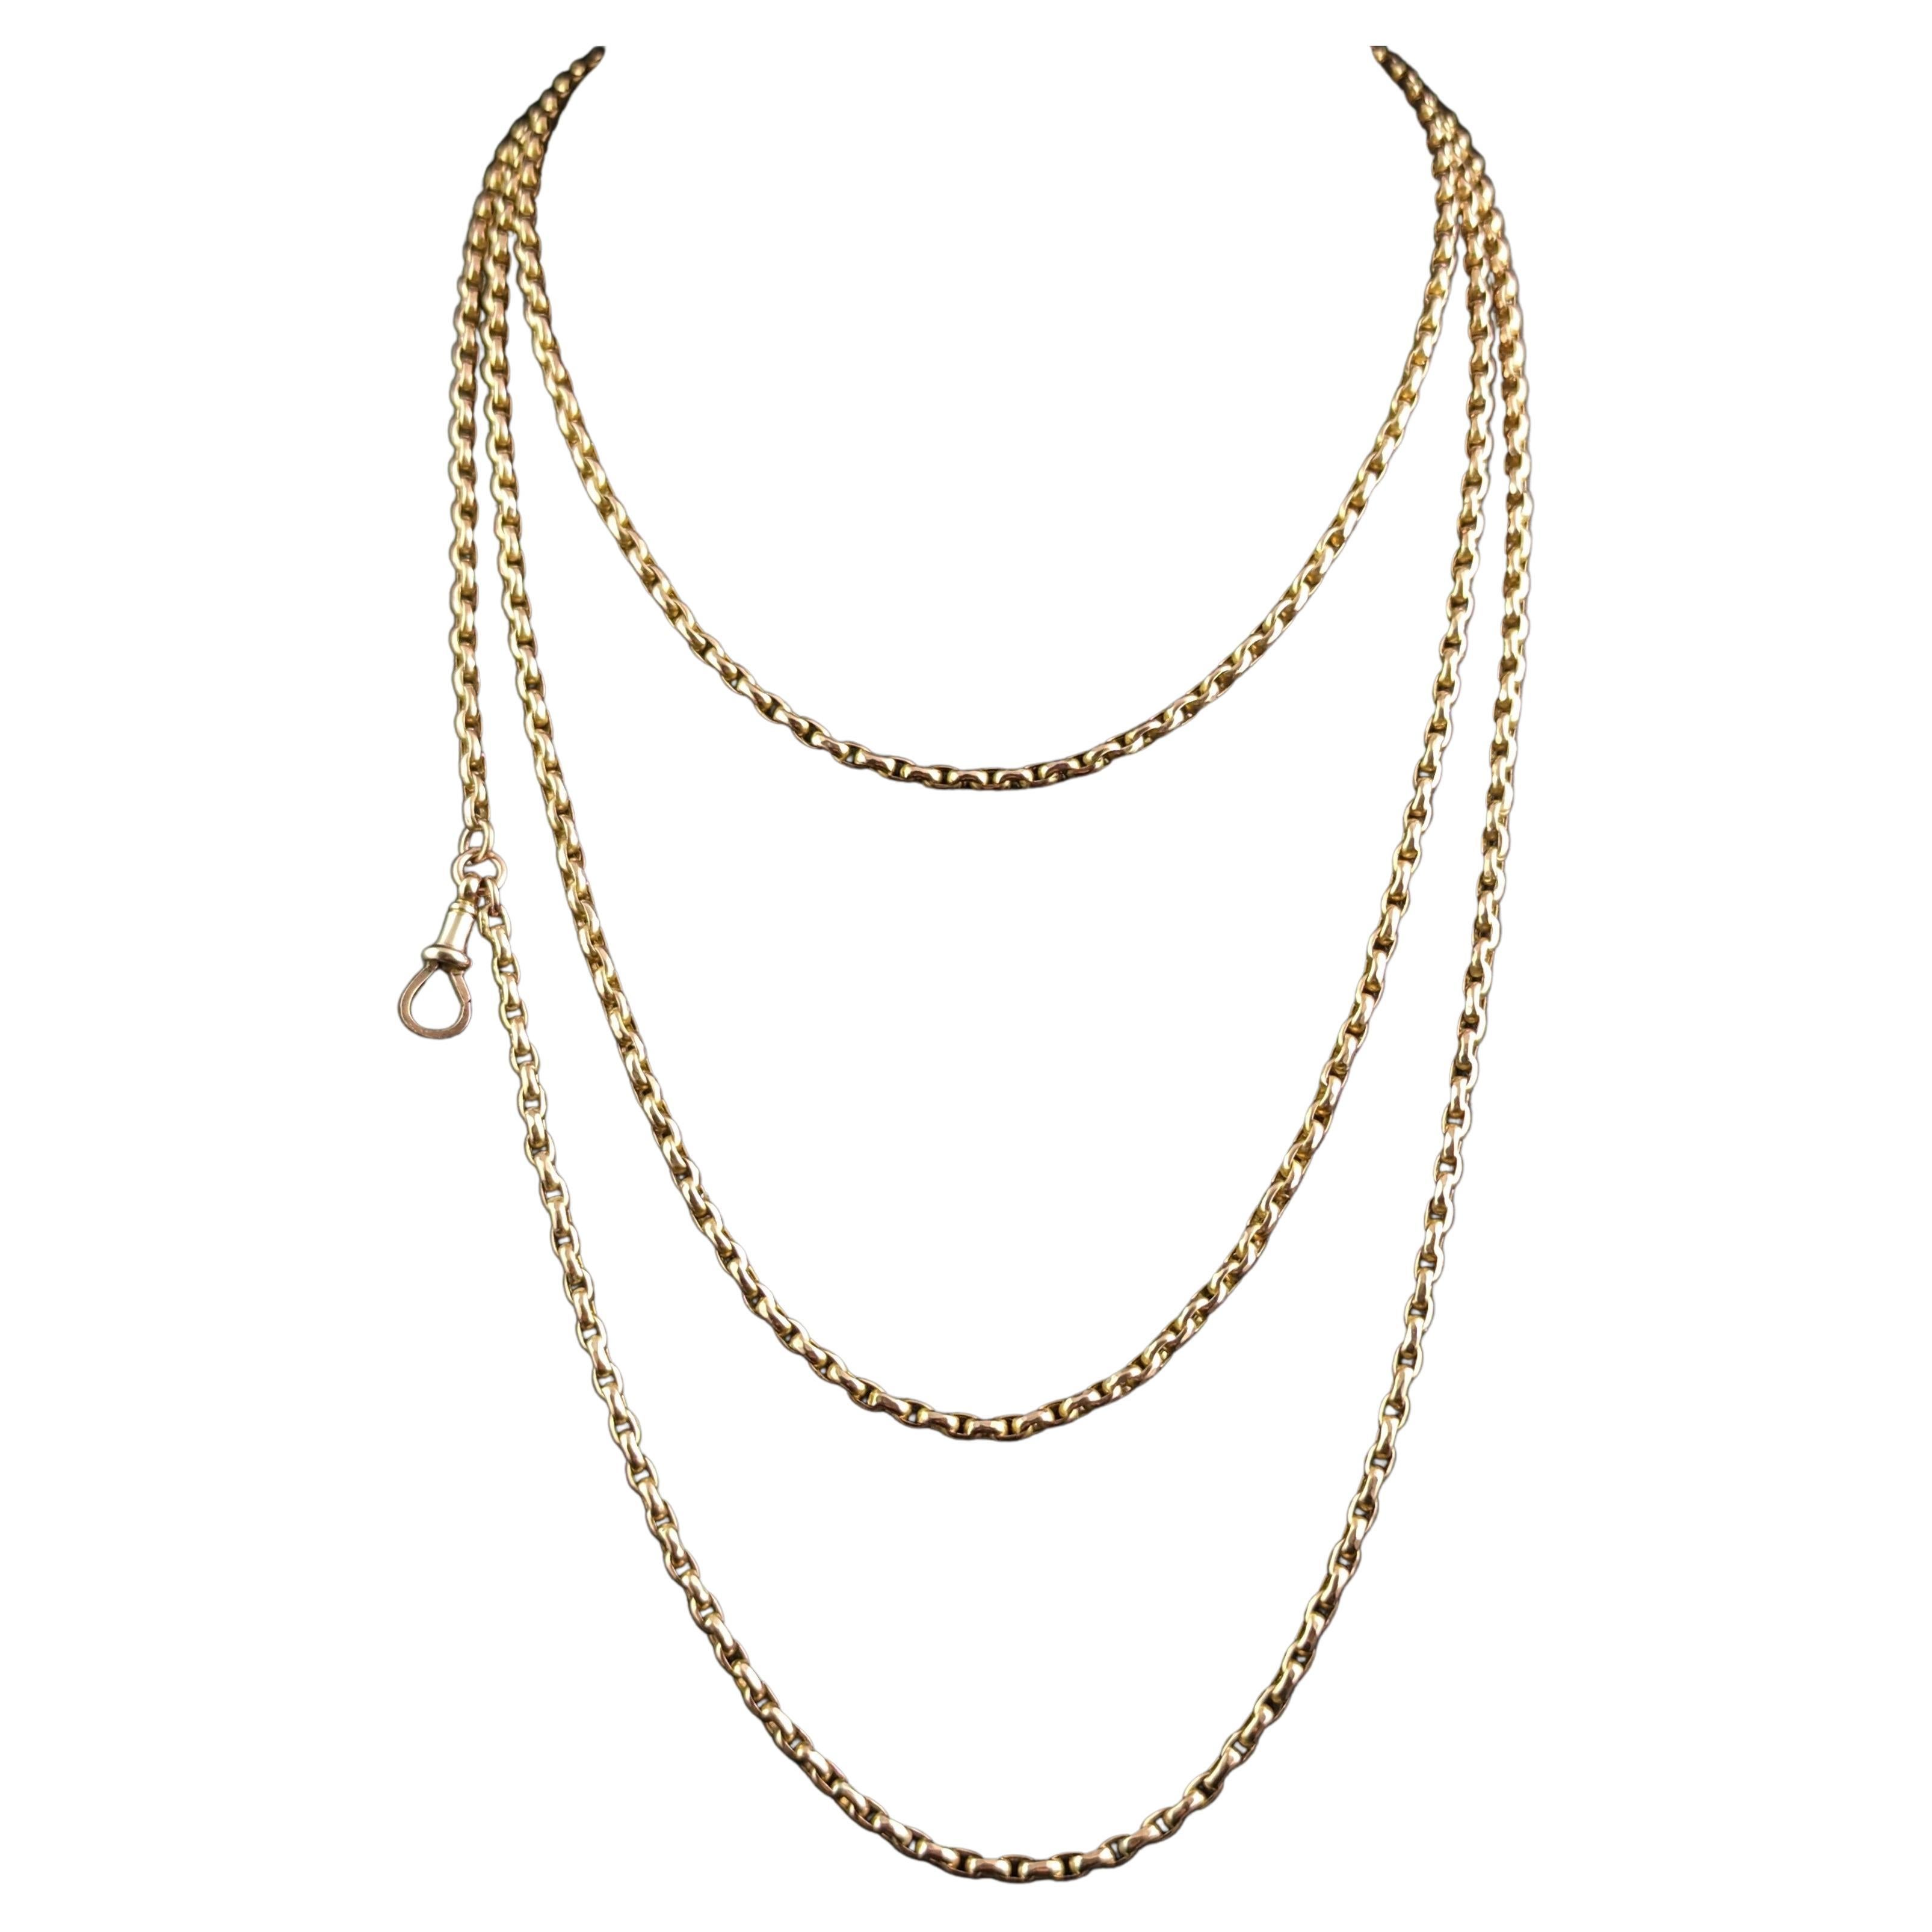 Antique 9k Yellow Gold Long Chain Necklace, Longuard, Victorian